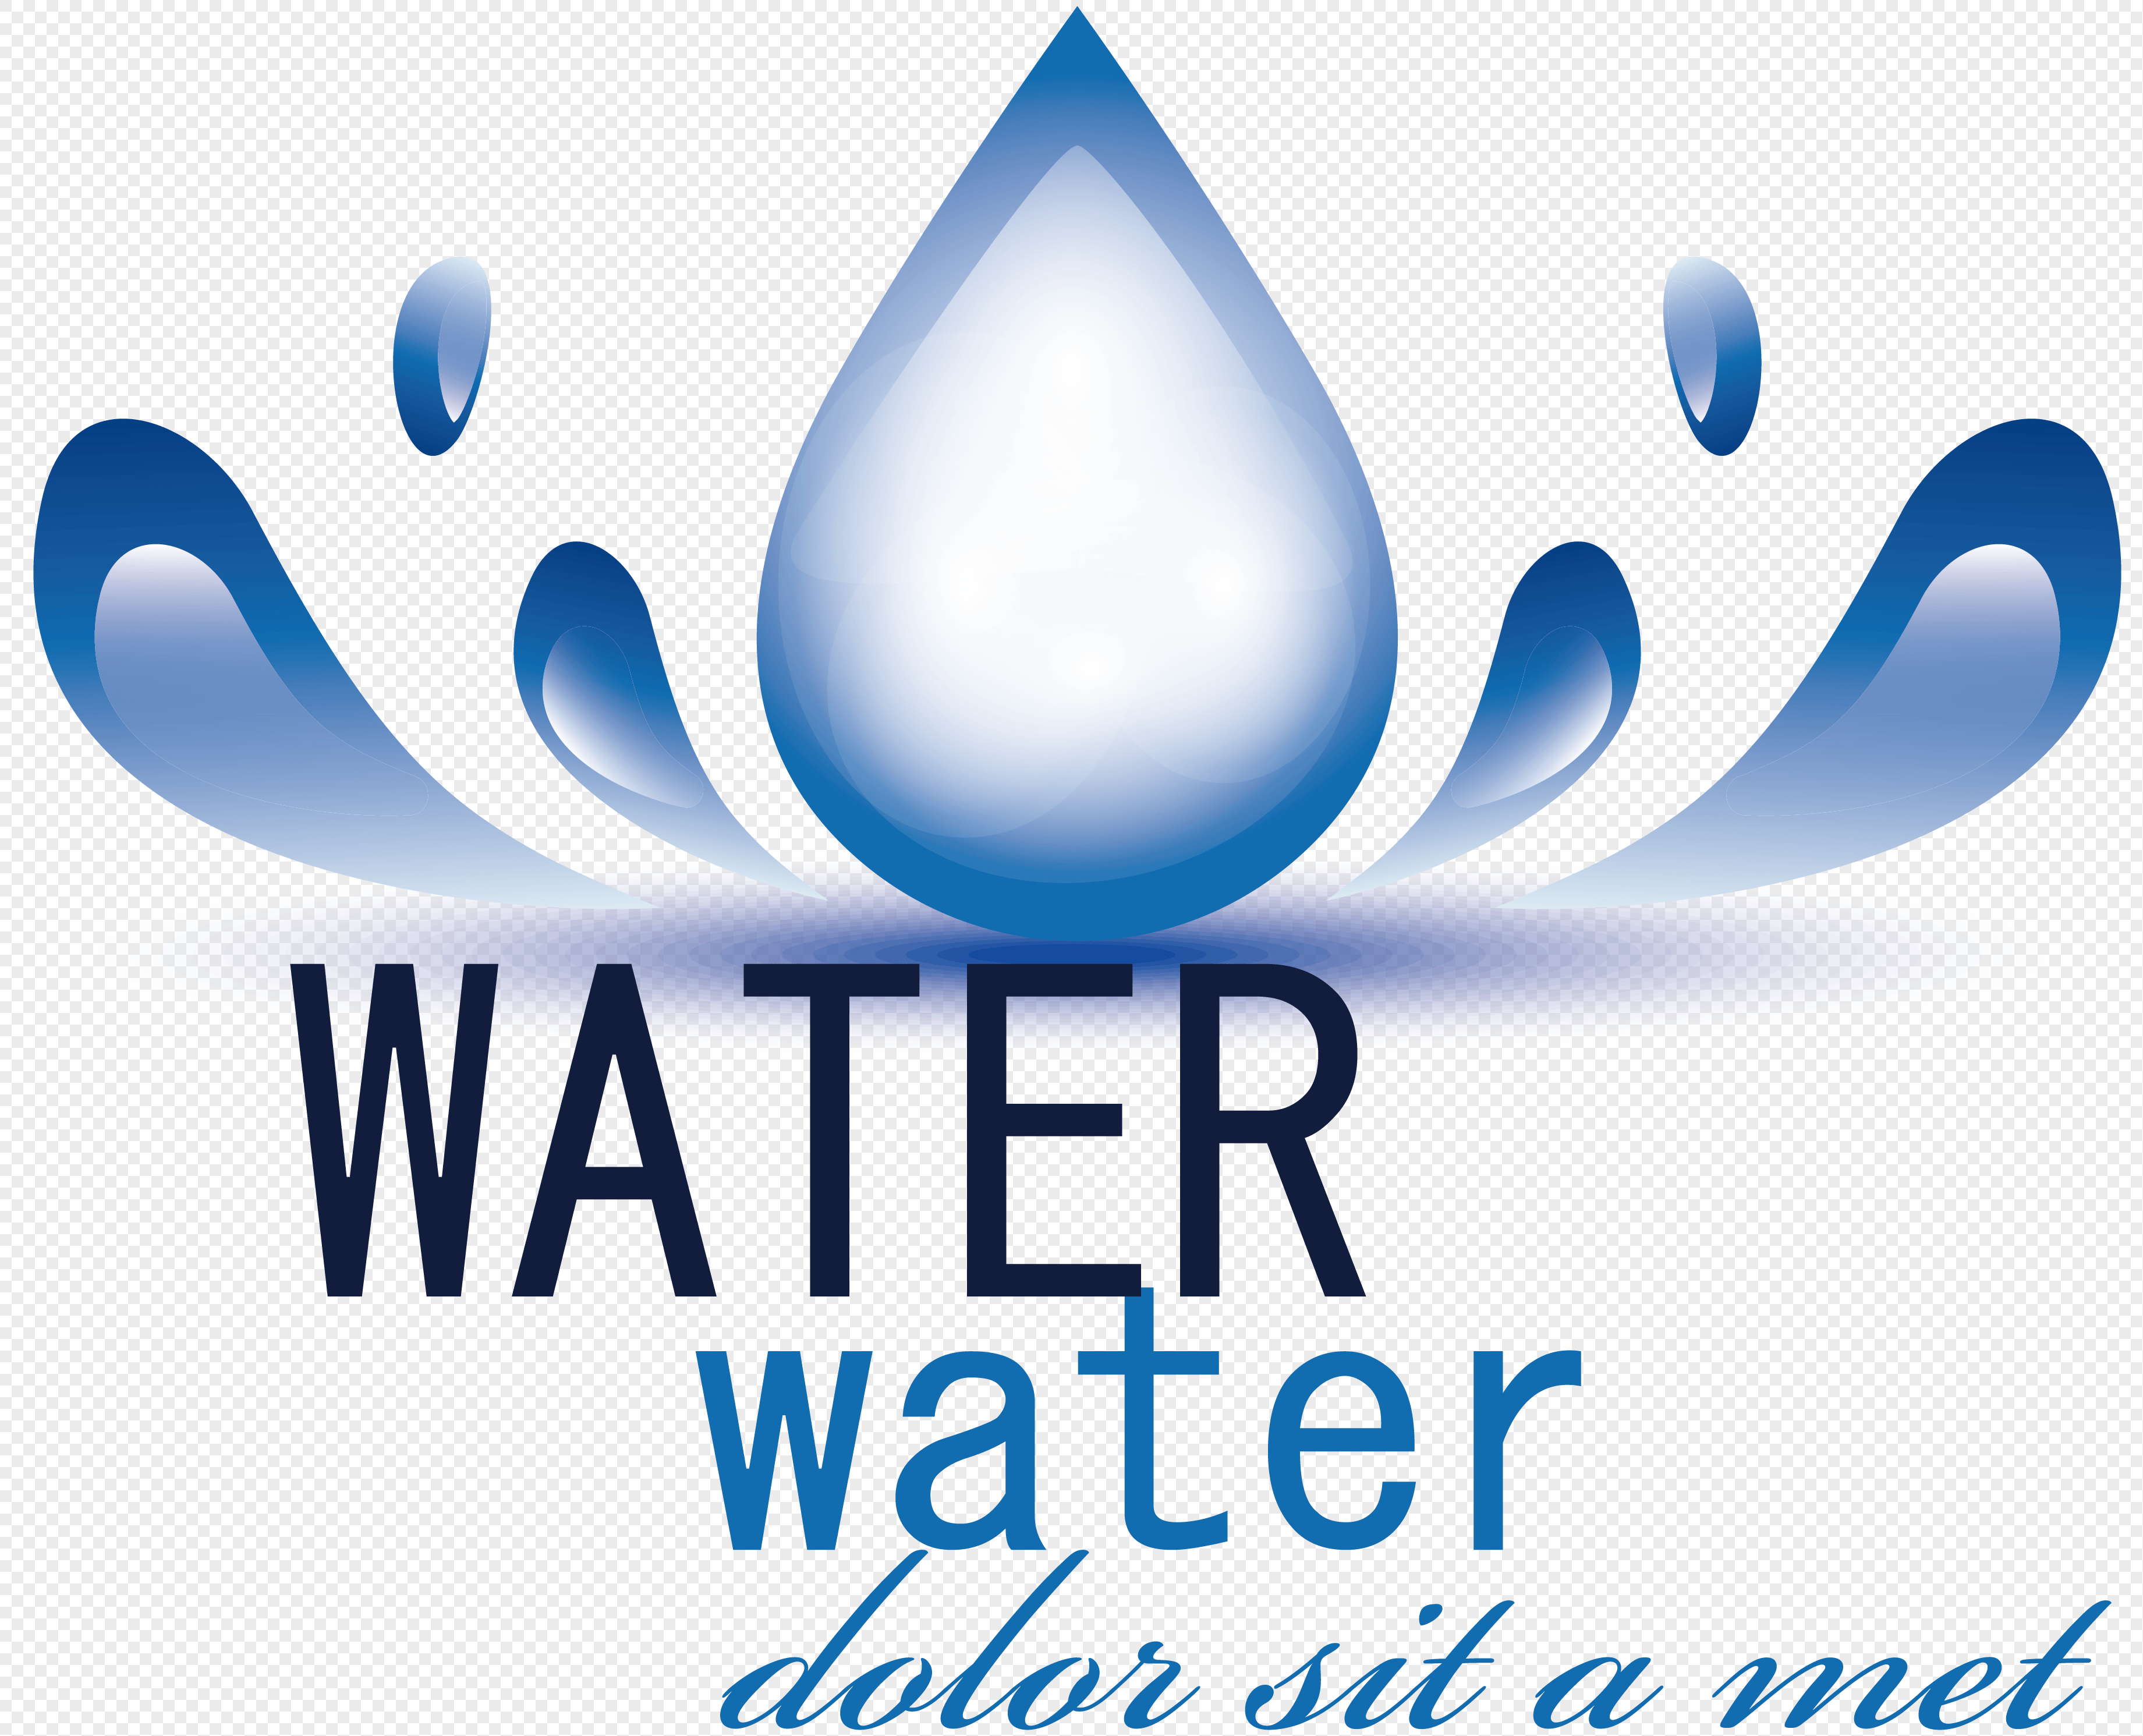 Water Drop Logo - Design elements of hand drawn water drop logo png image_picture free